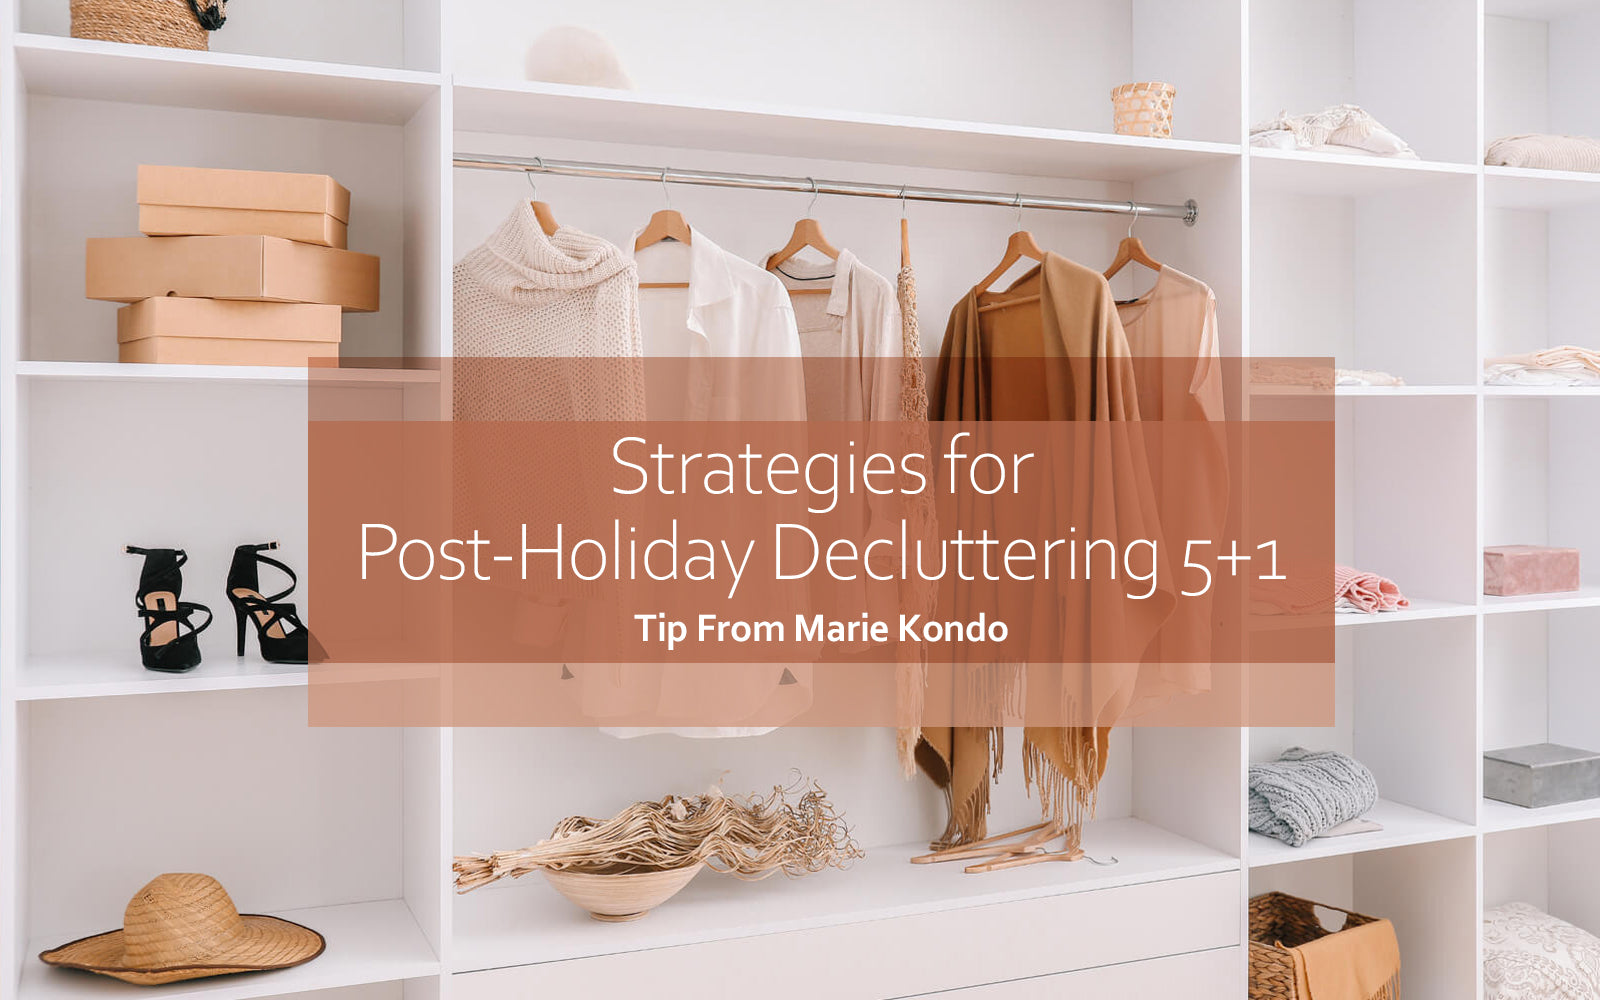 Marie Kondo-inspired Strategies for Post-Holiday Decluttering - The Magic Toy Shop Blog Post